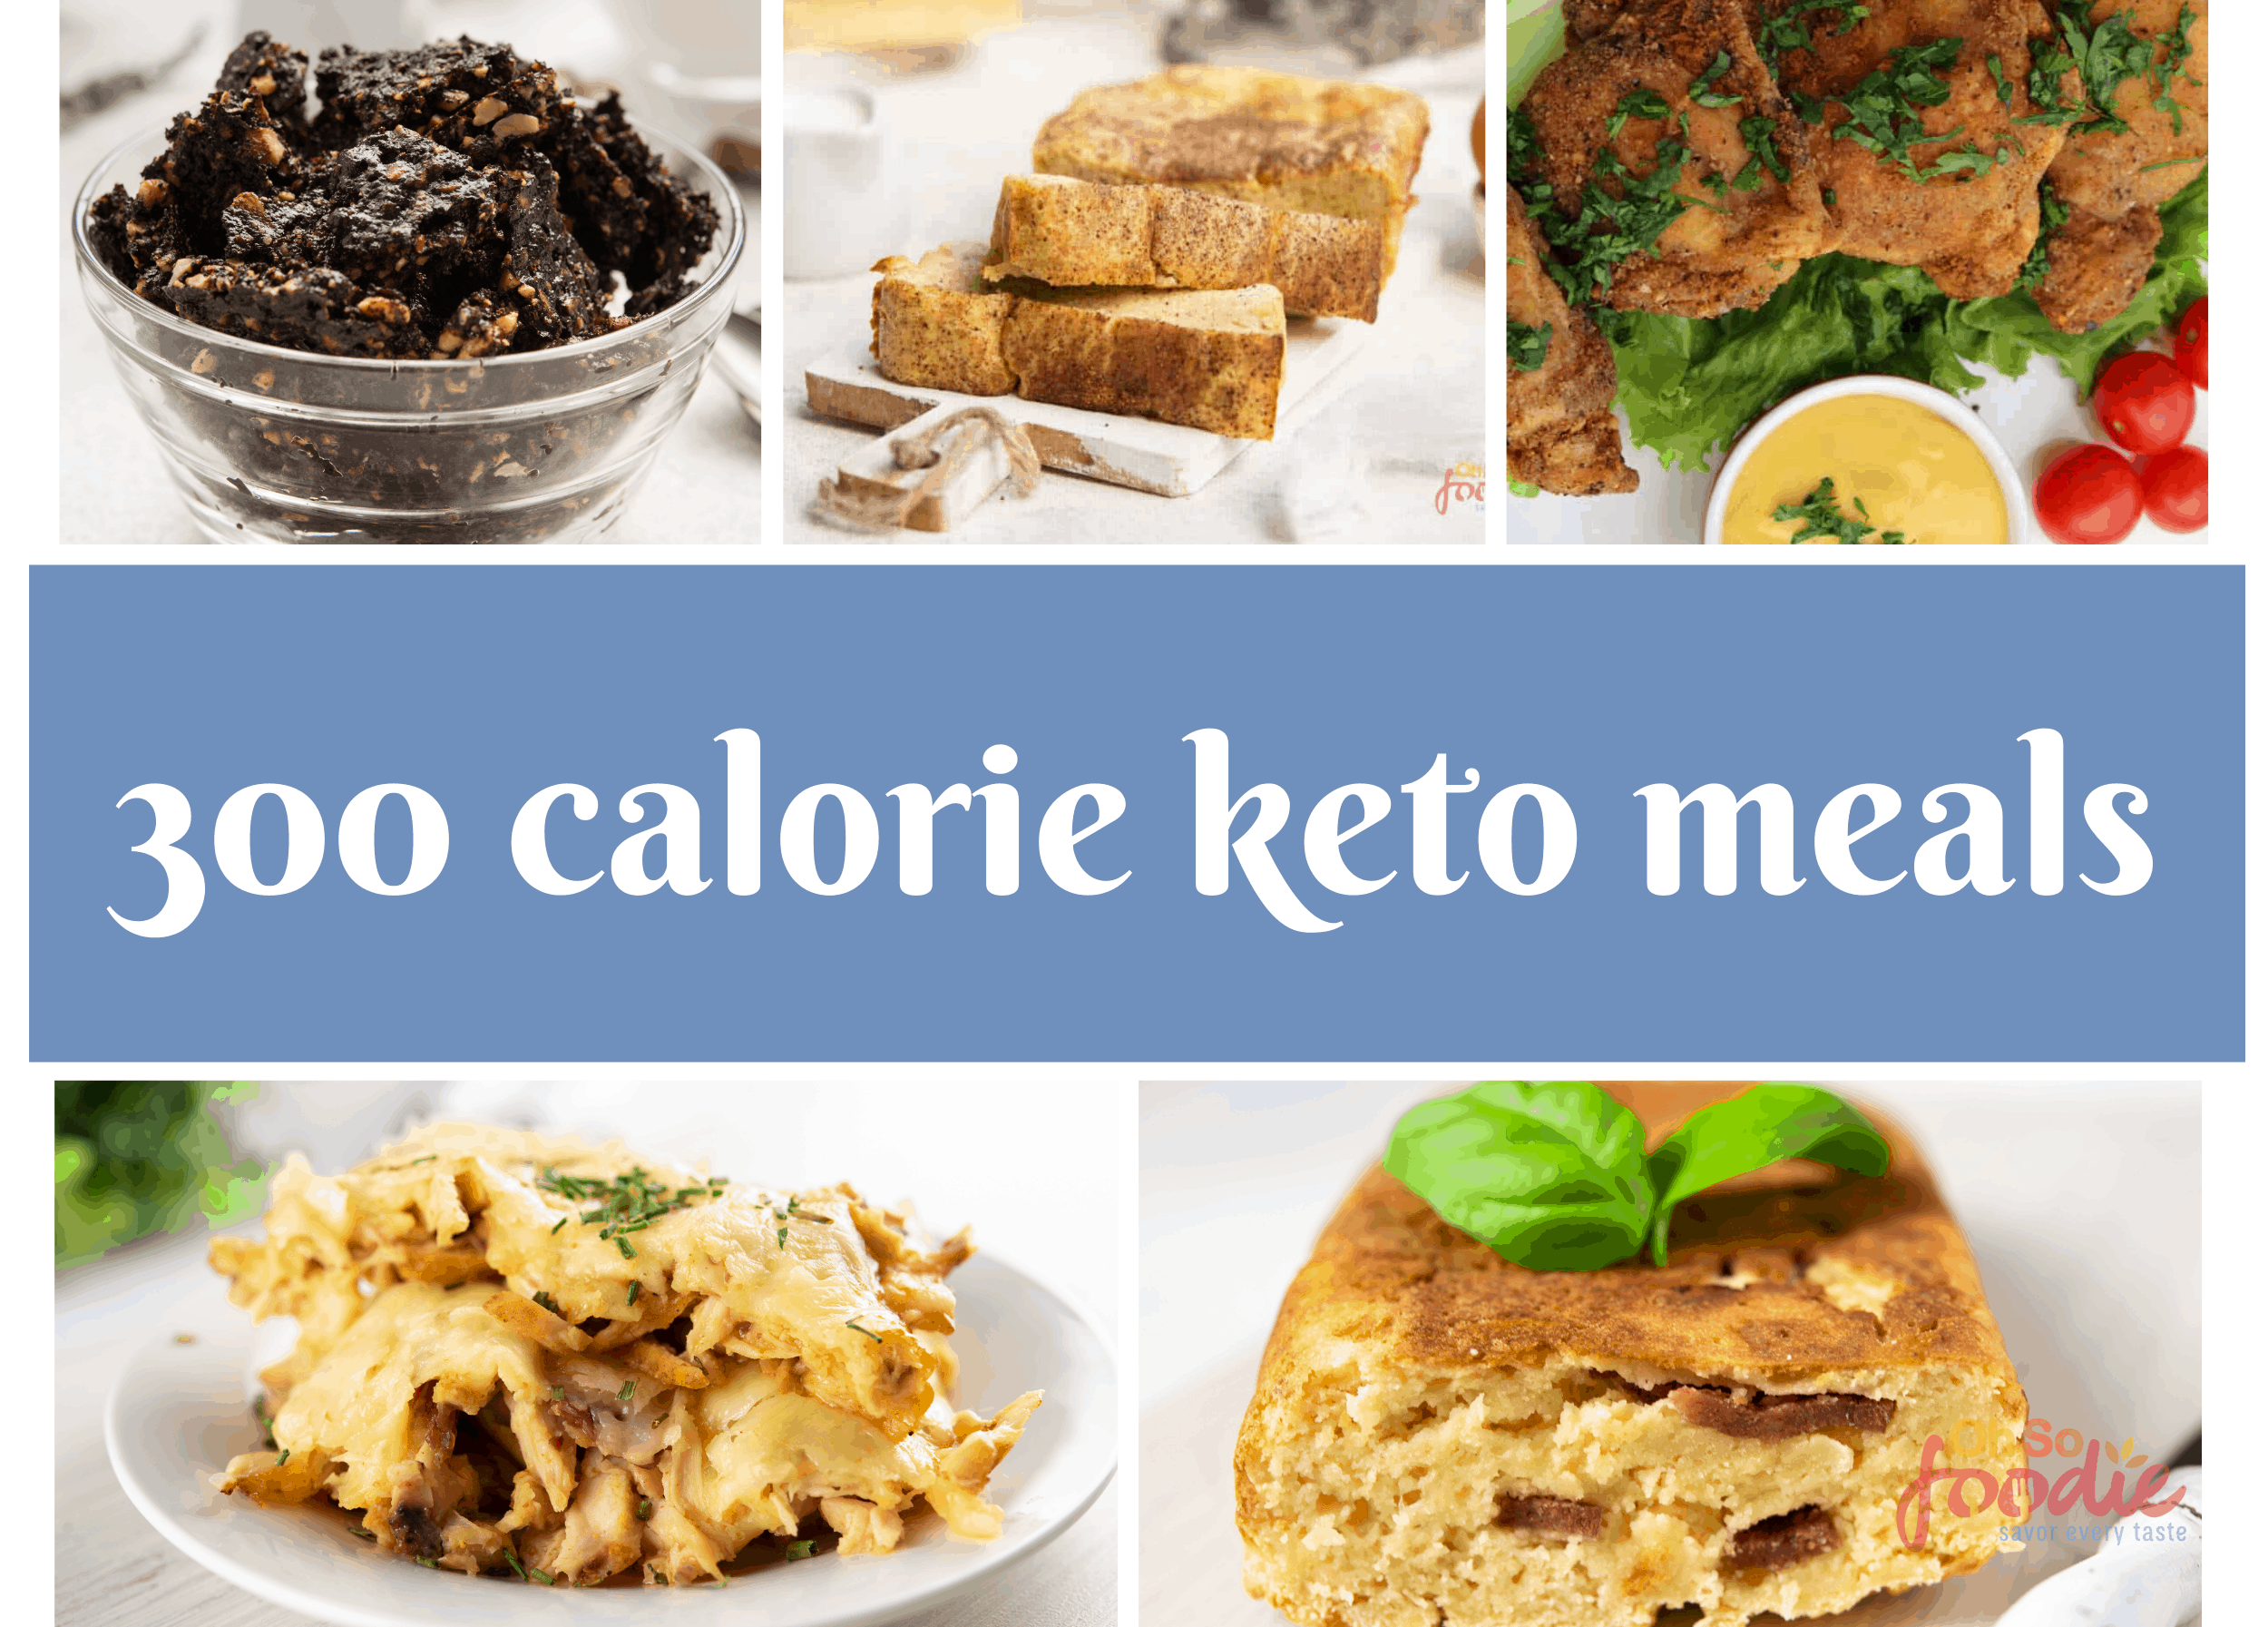 12 Easy 300 Calorie Keto Meals - Oh So Foodie